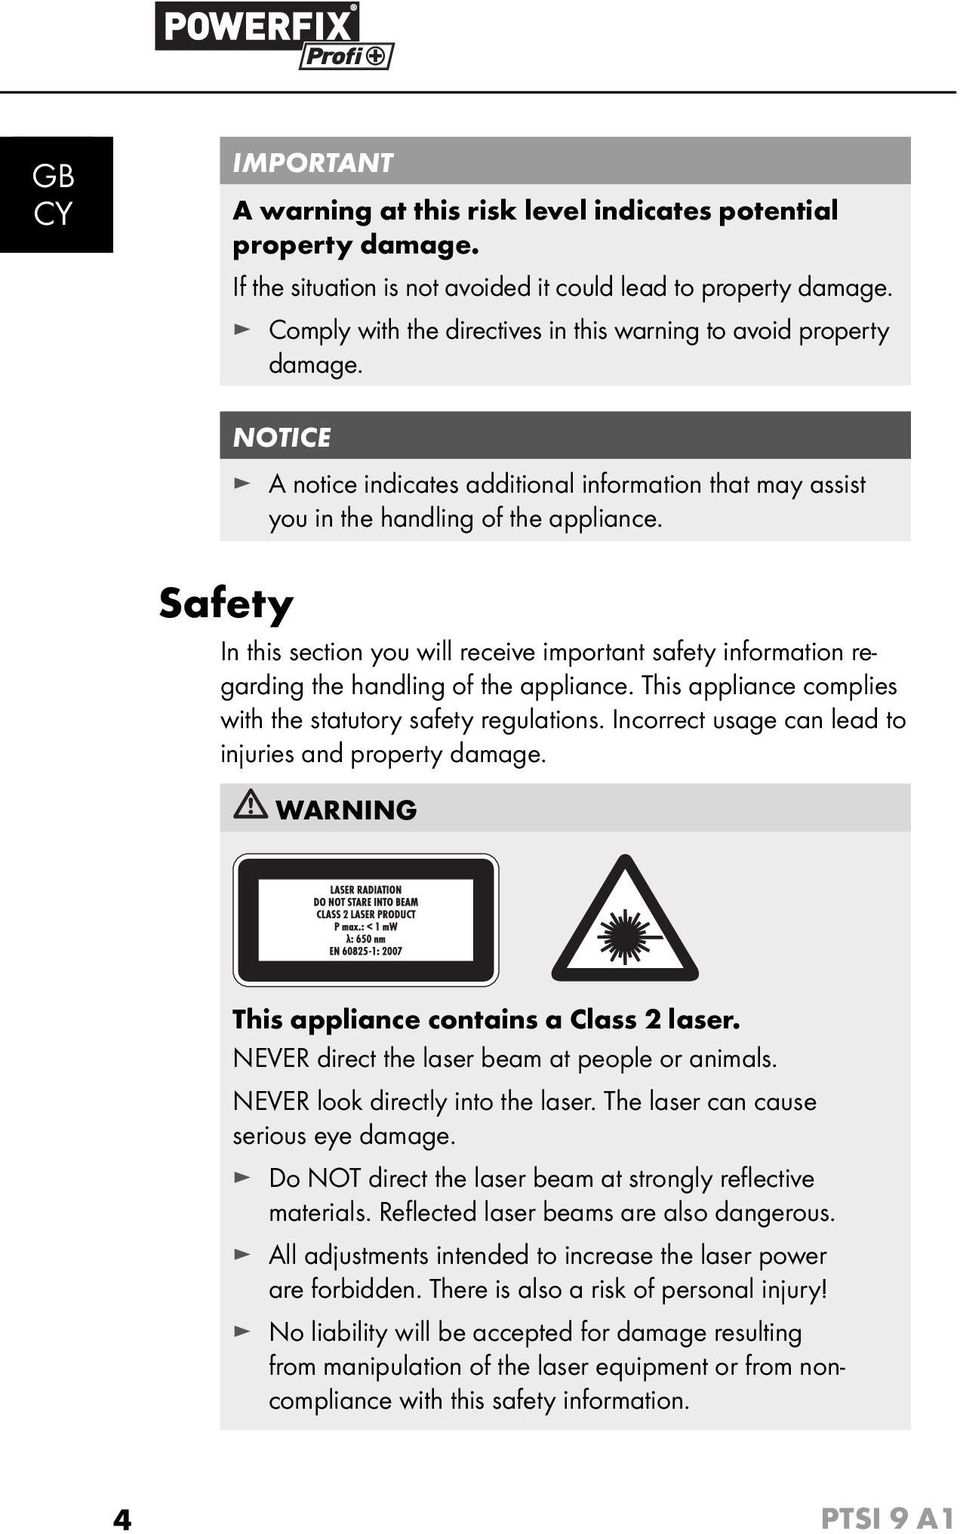 Safety In this section you will receive important safety information regarding the handling of the appliance. This appliance complies with the statutory safety regulations.